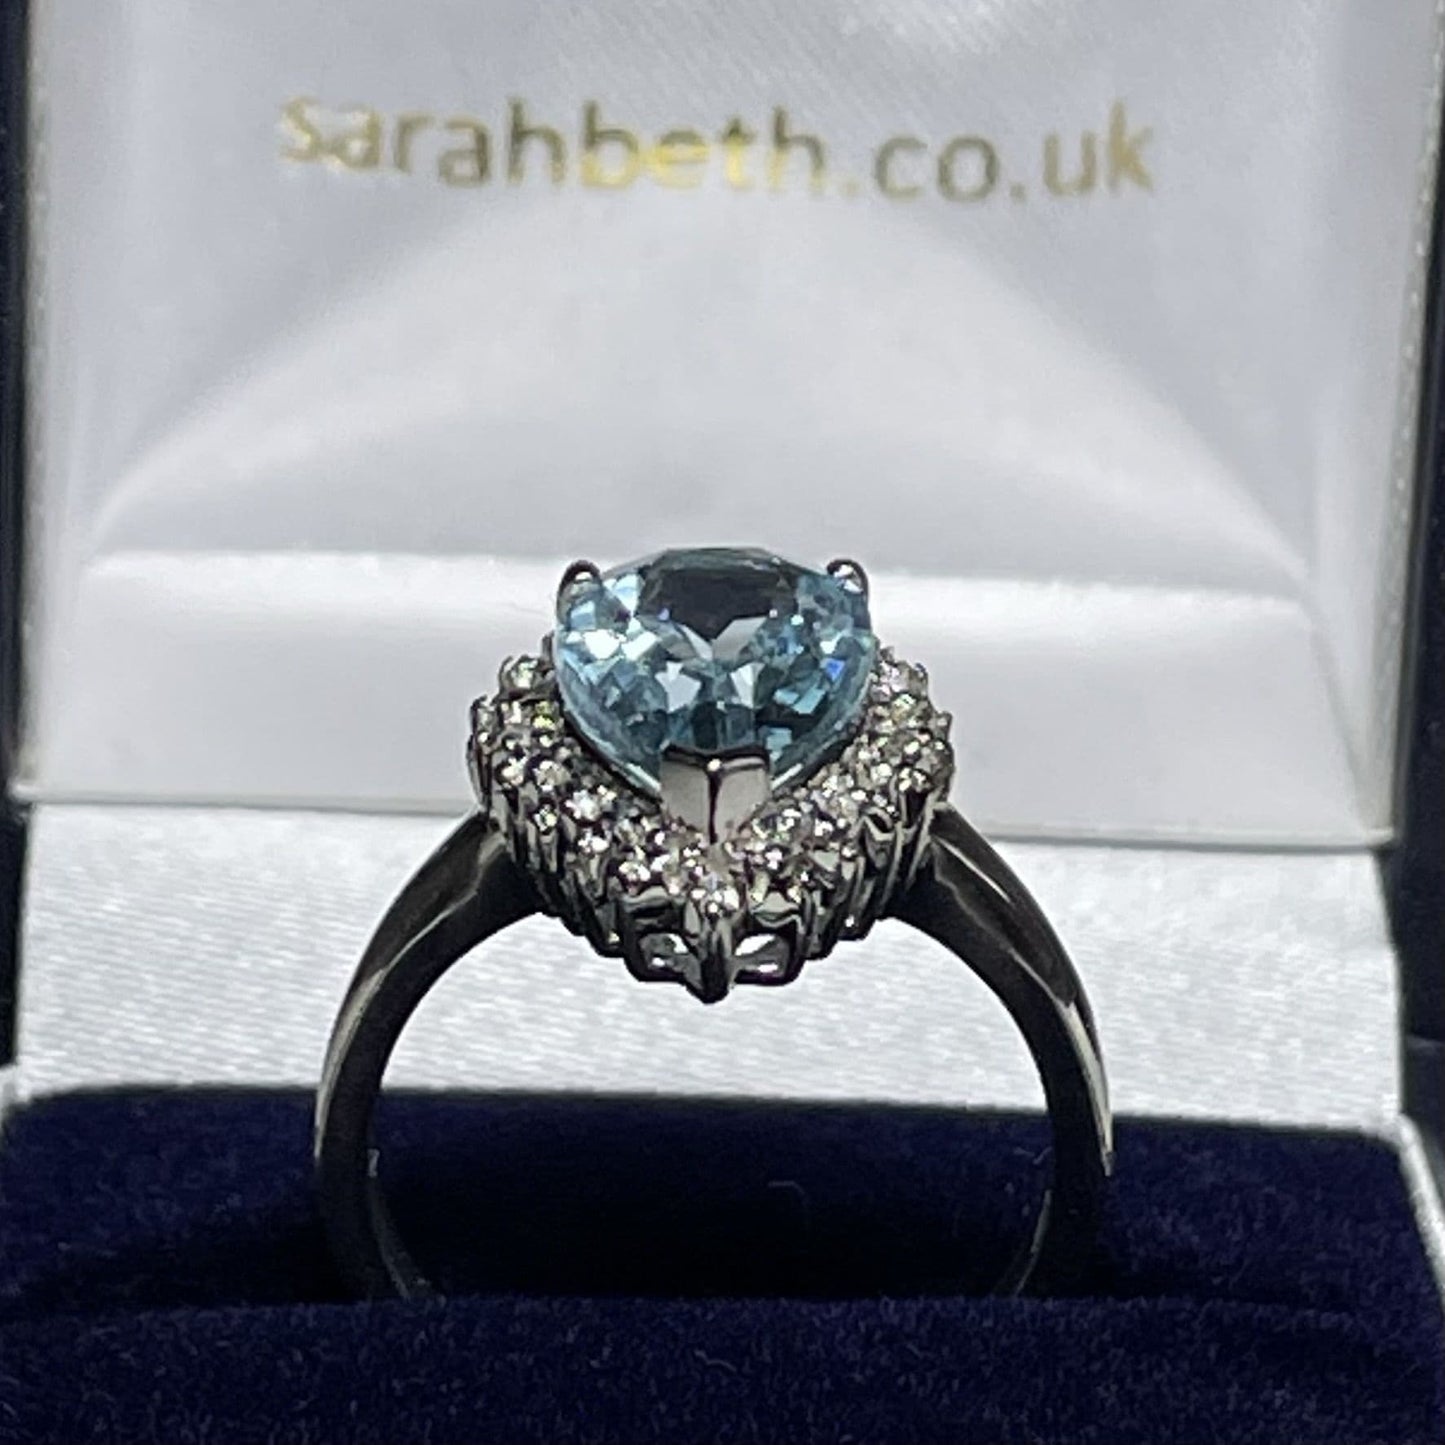 Large pear shaped blue topaz and diamond sterling silver cluster ring